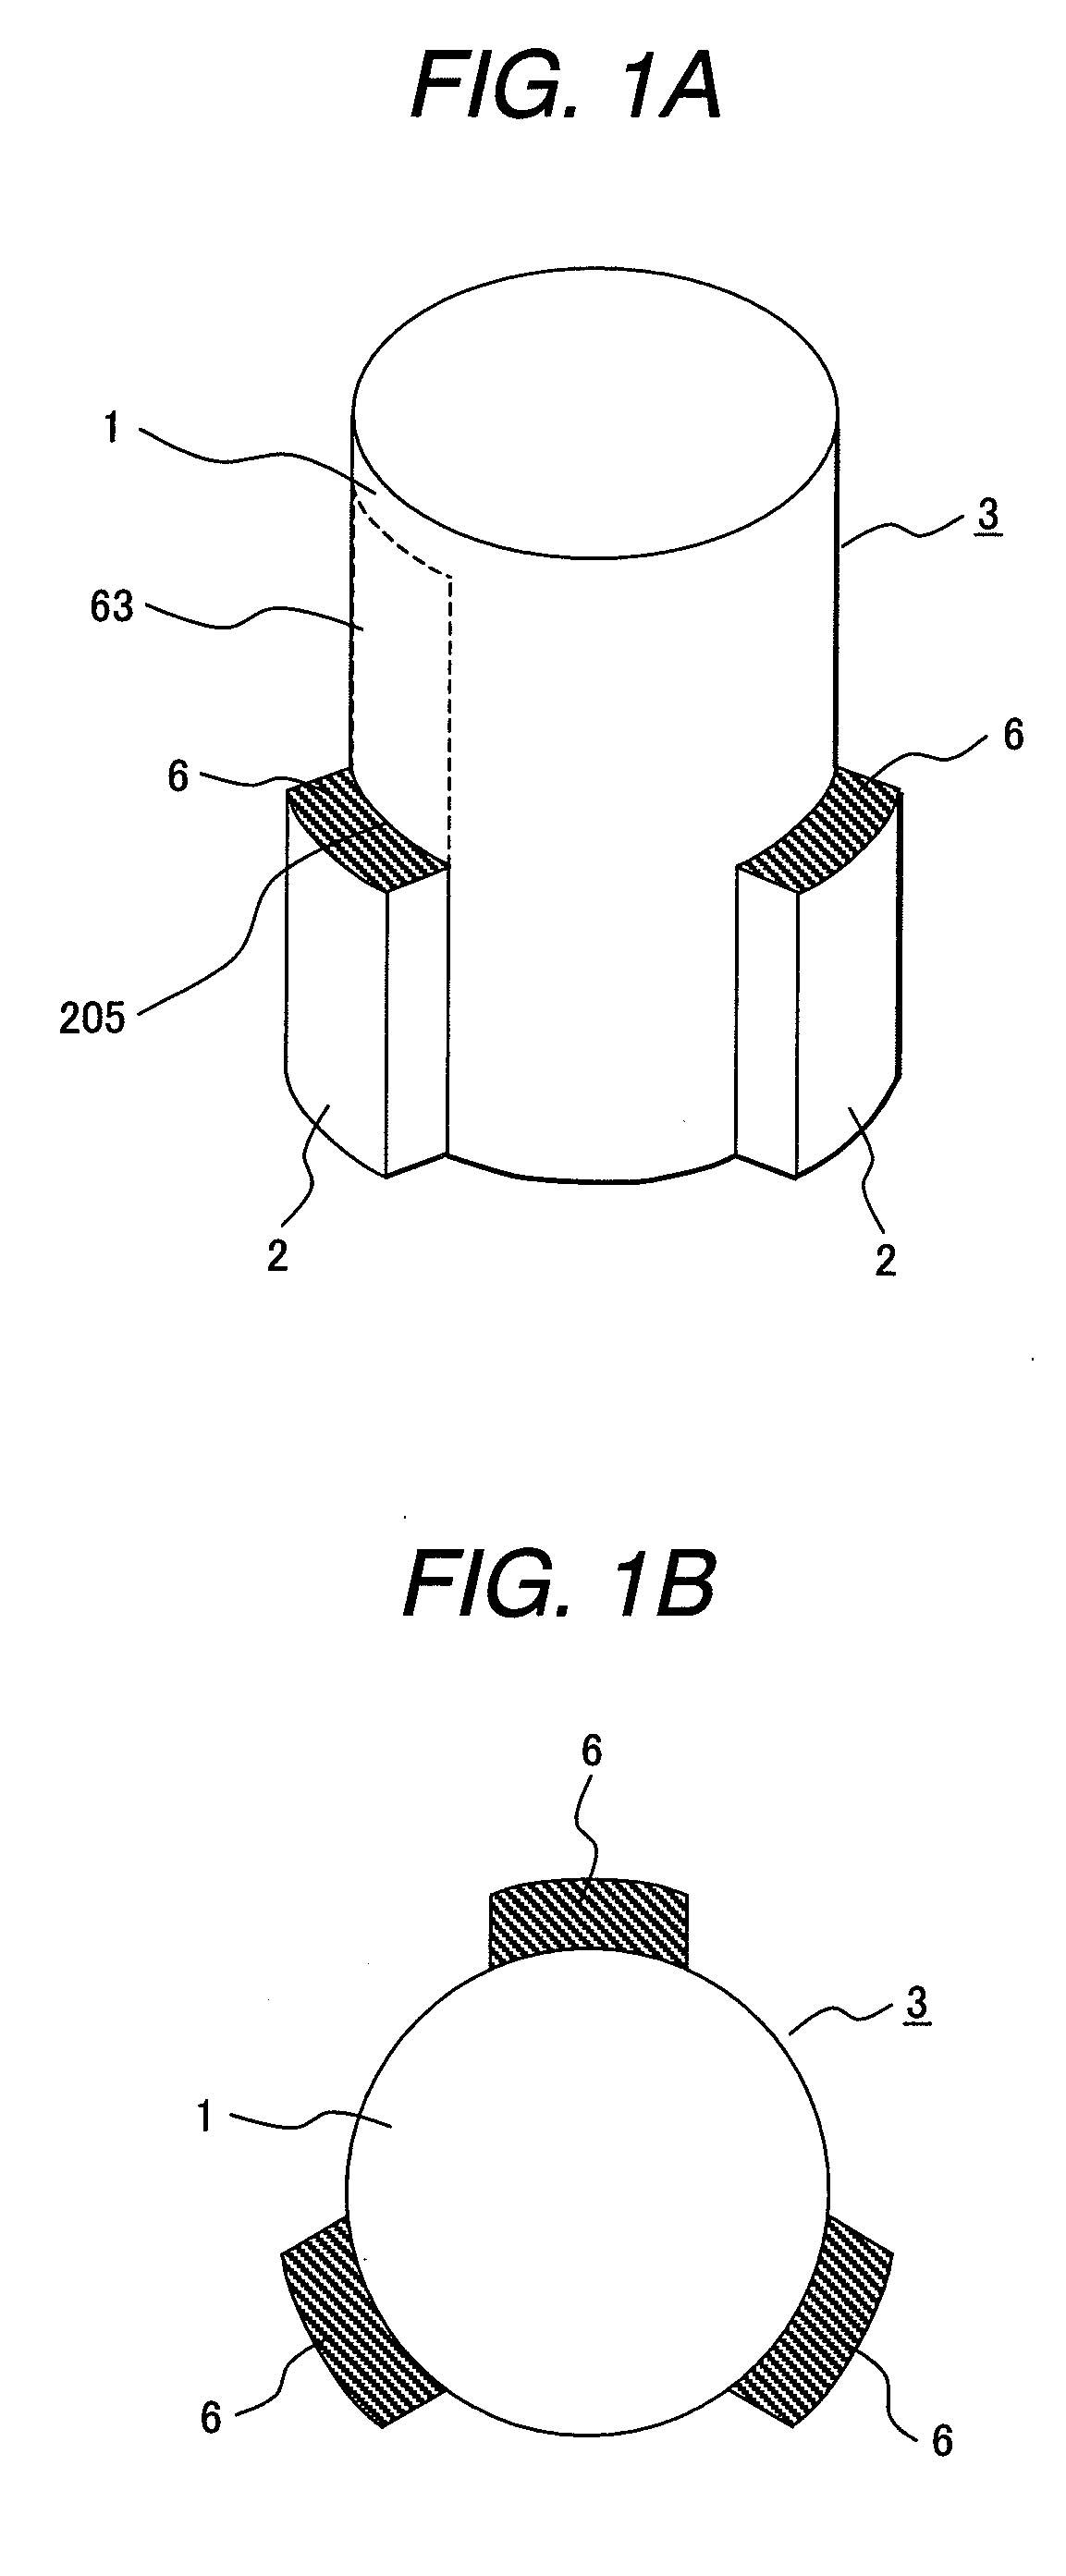 Core rod for forming a cylindrical green compact, apparatus for forming a cylindrical green compact, and method for forming a cylindrical green compact